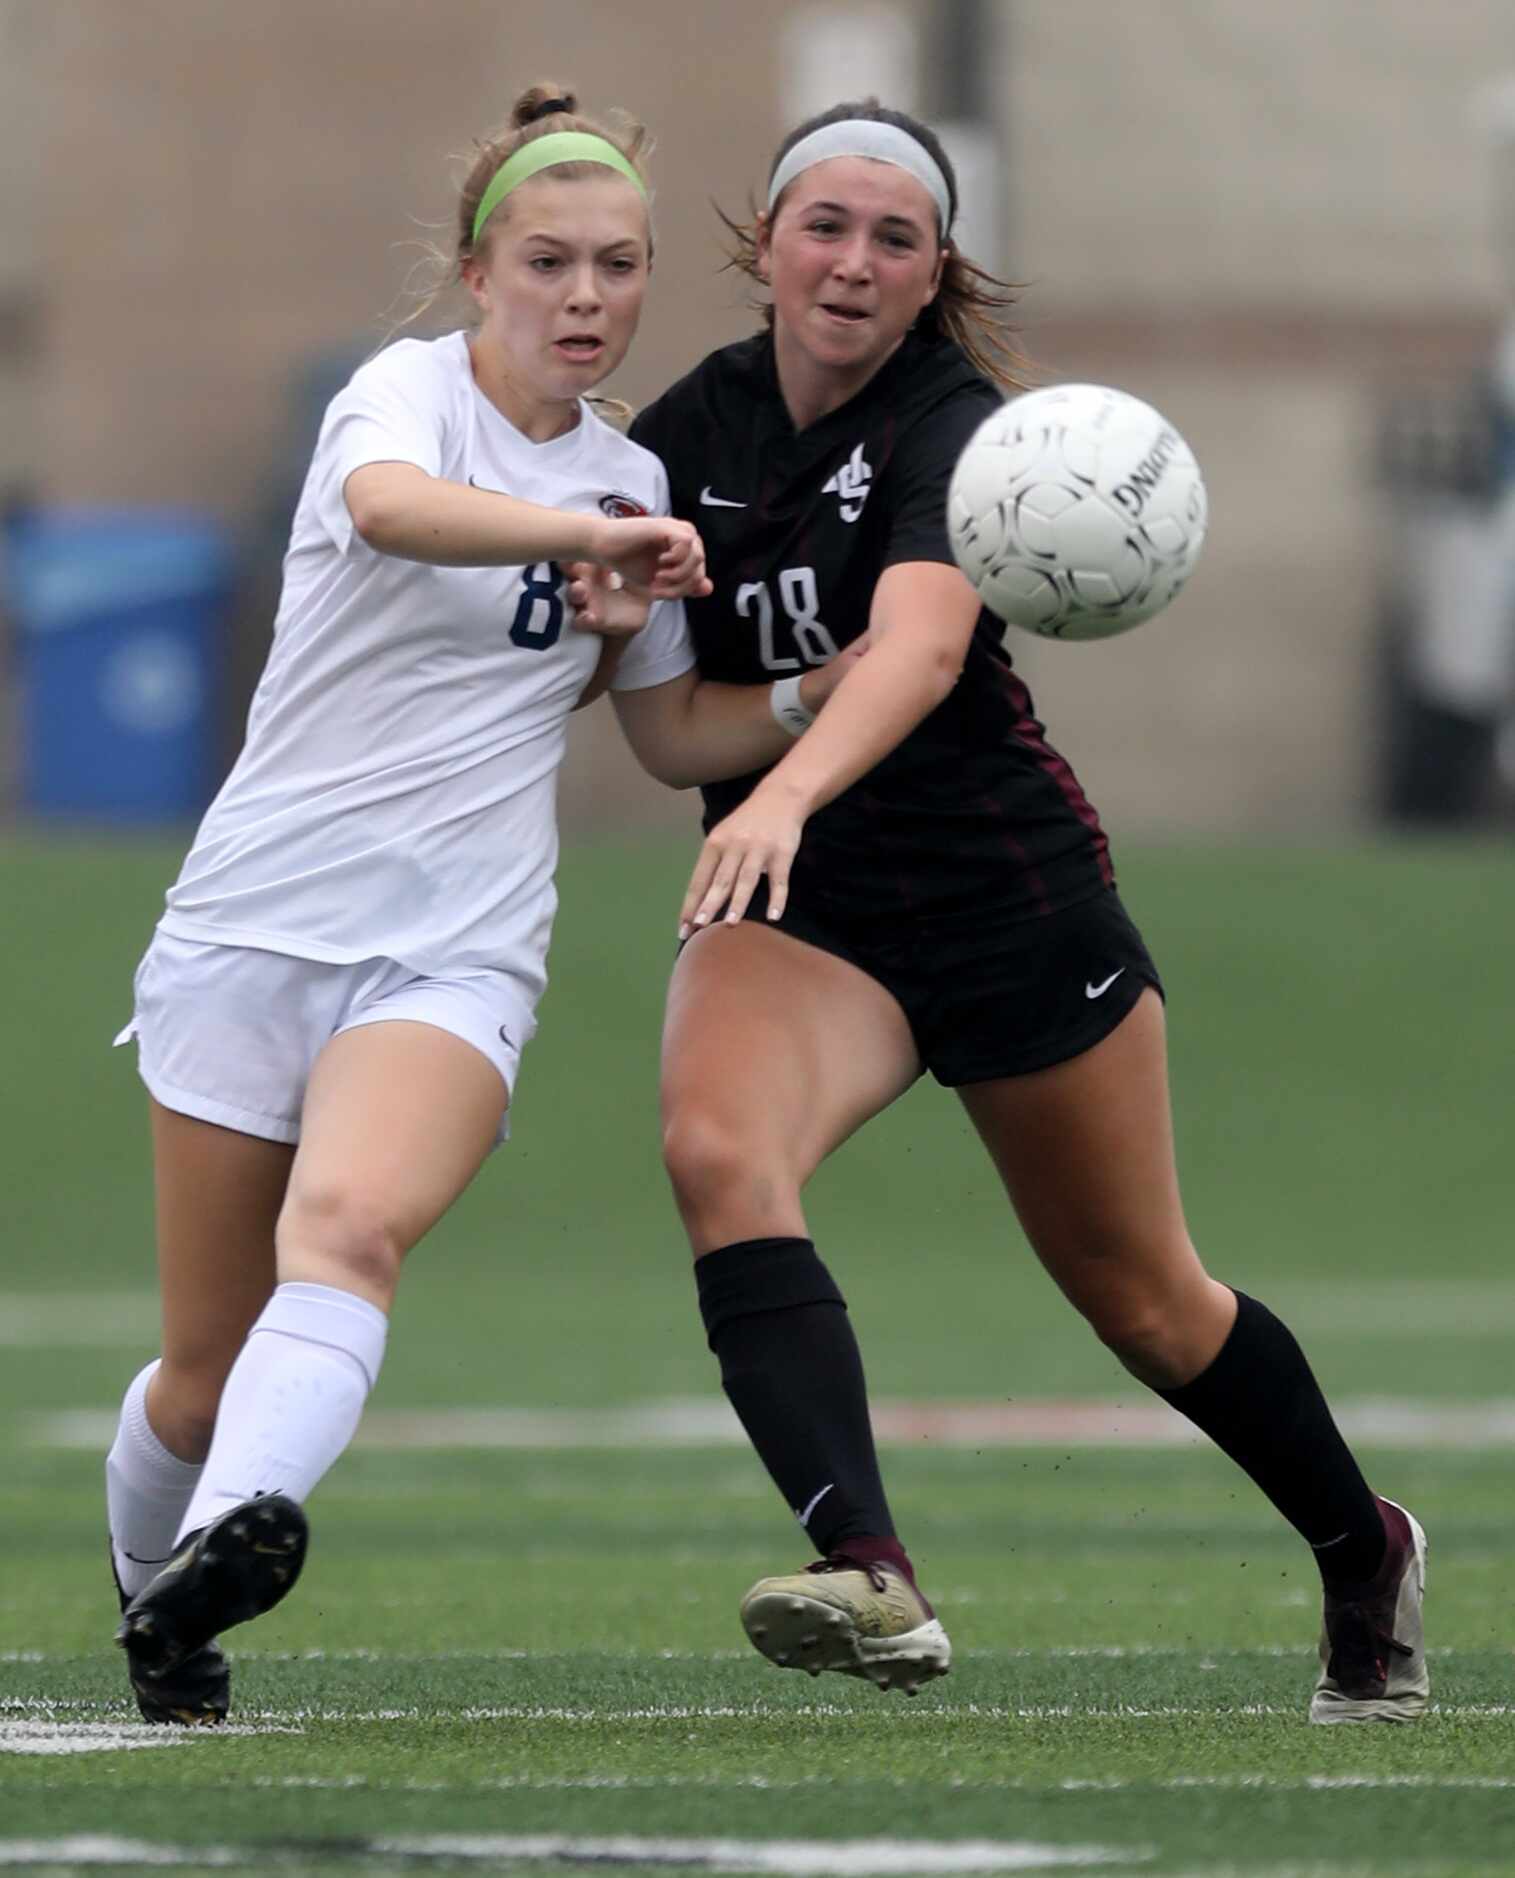 Wakeland's Brooke Hartshorn (8) and Dripping Springs' Taylor Hodsden (28) chase after the...